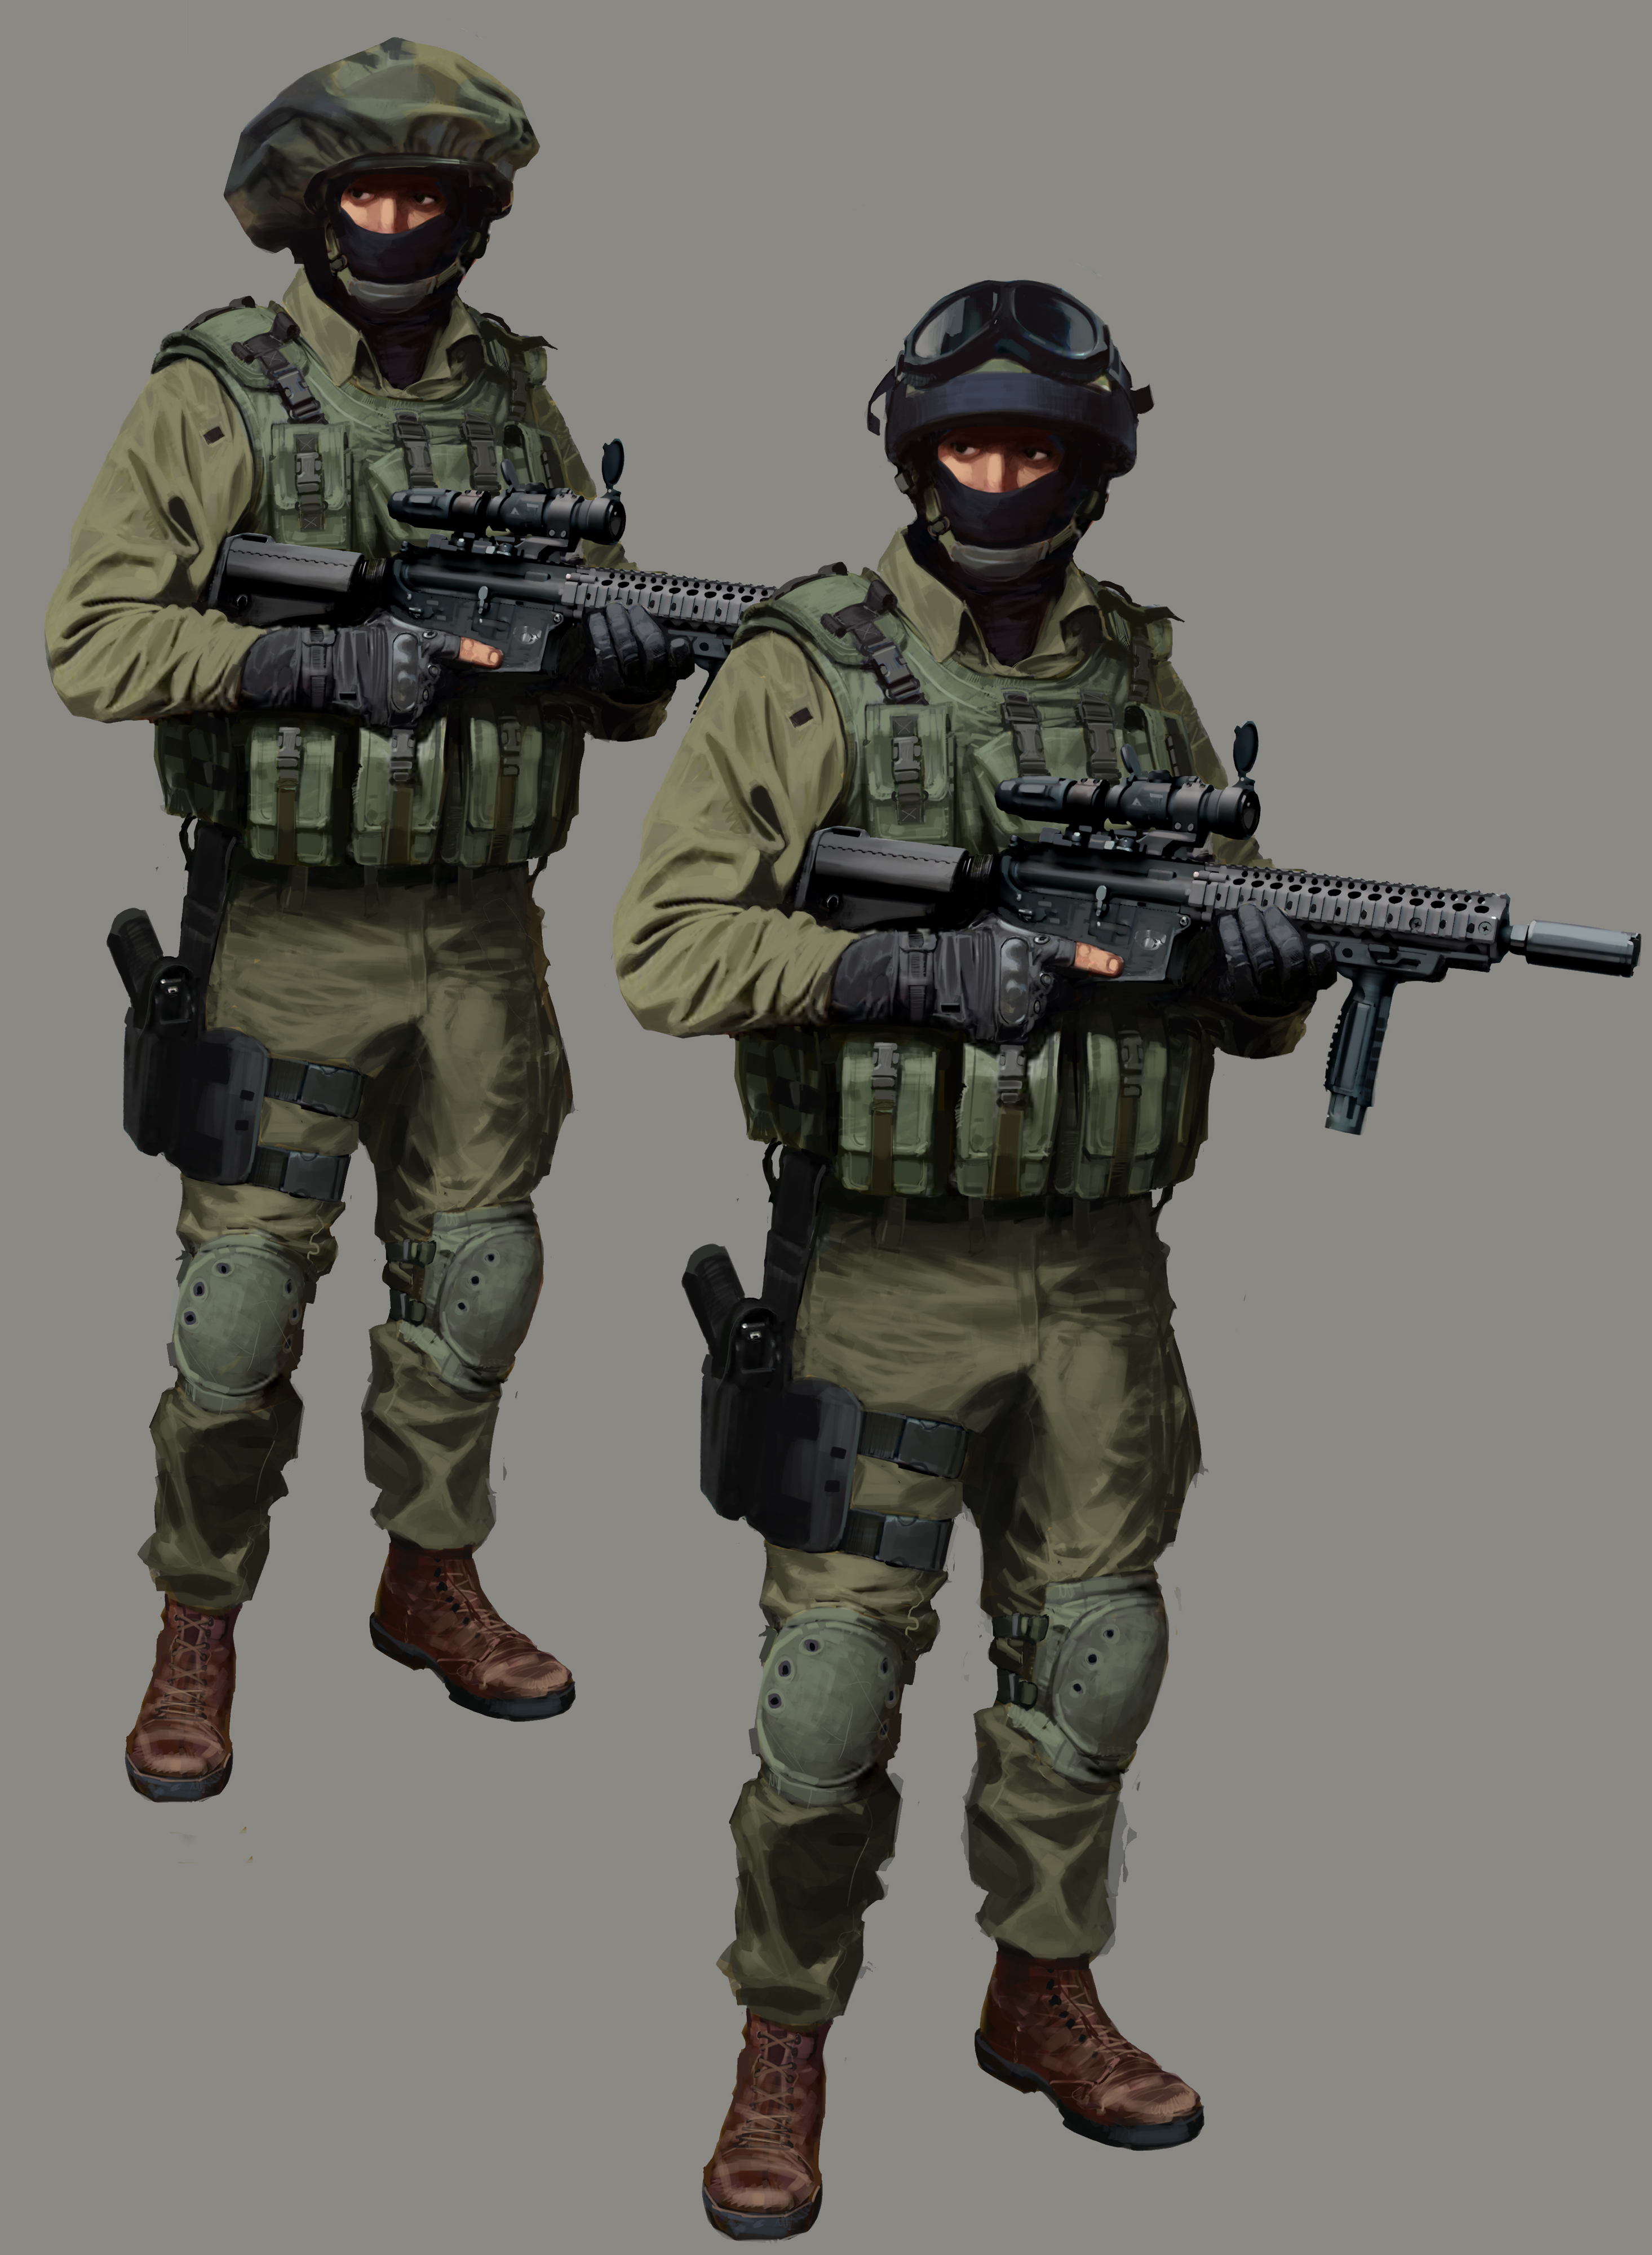 This is concept art from Counter Strike. while yes concept art can be made to look pretty, the true purpose is to quickly meld ideas for the director to decide.